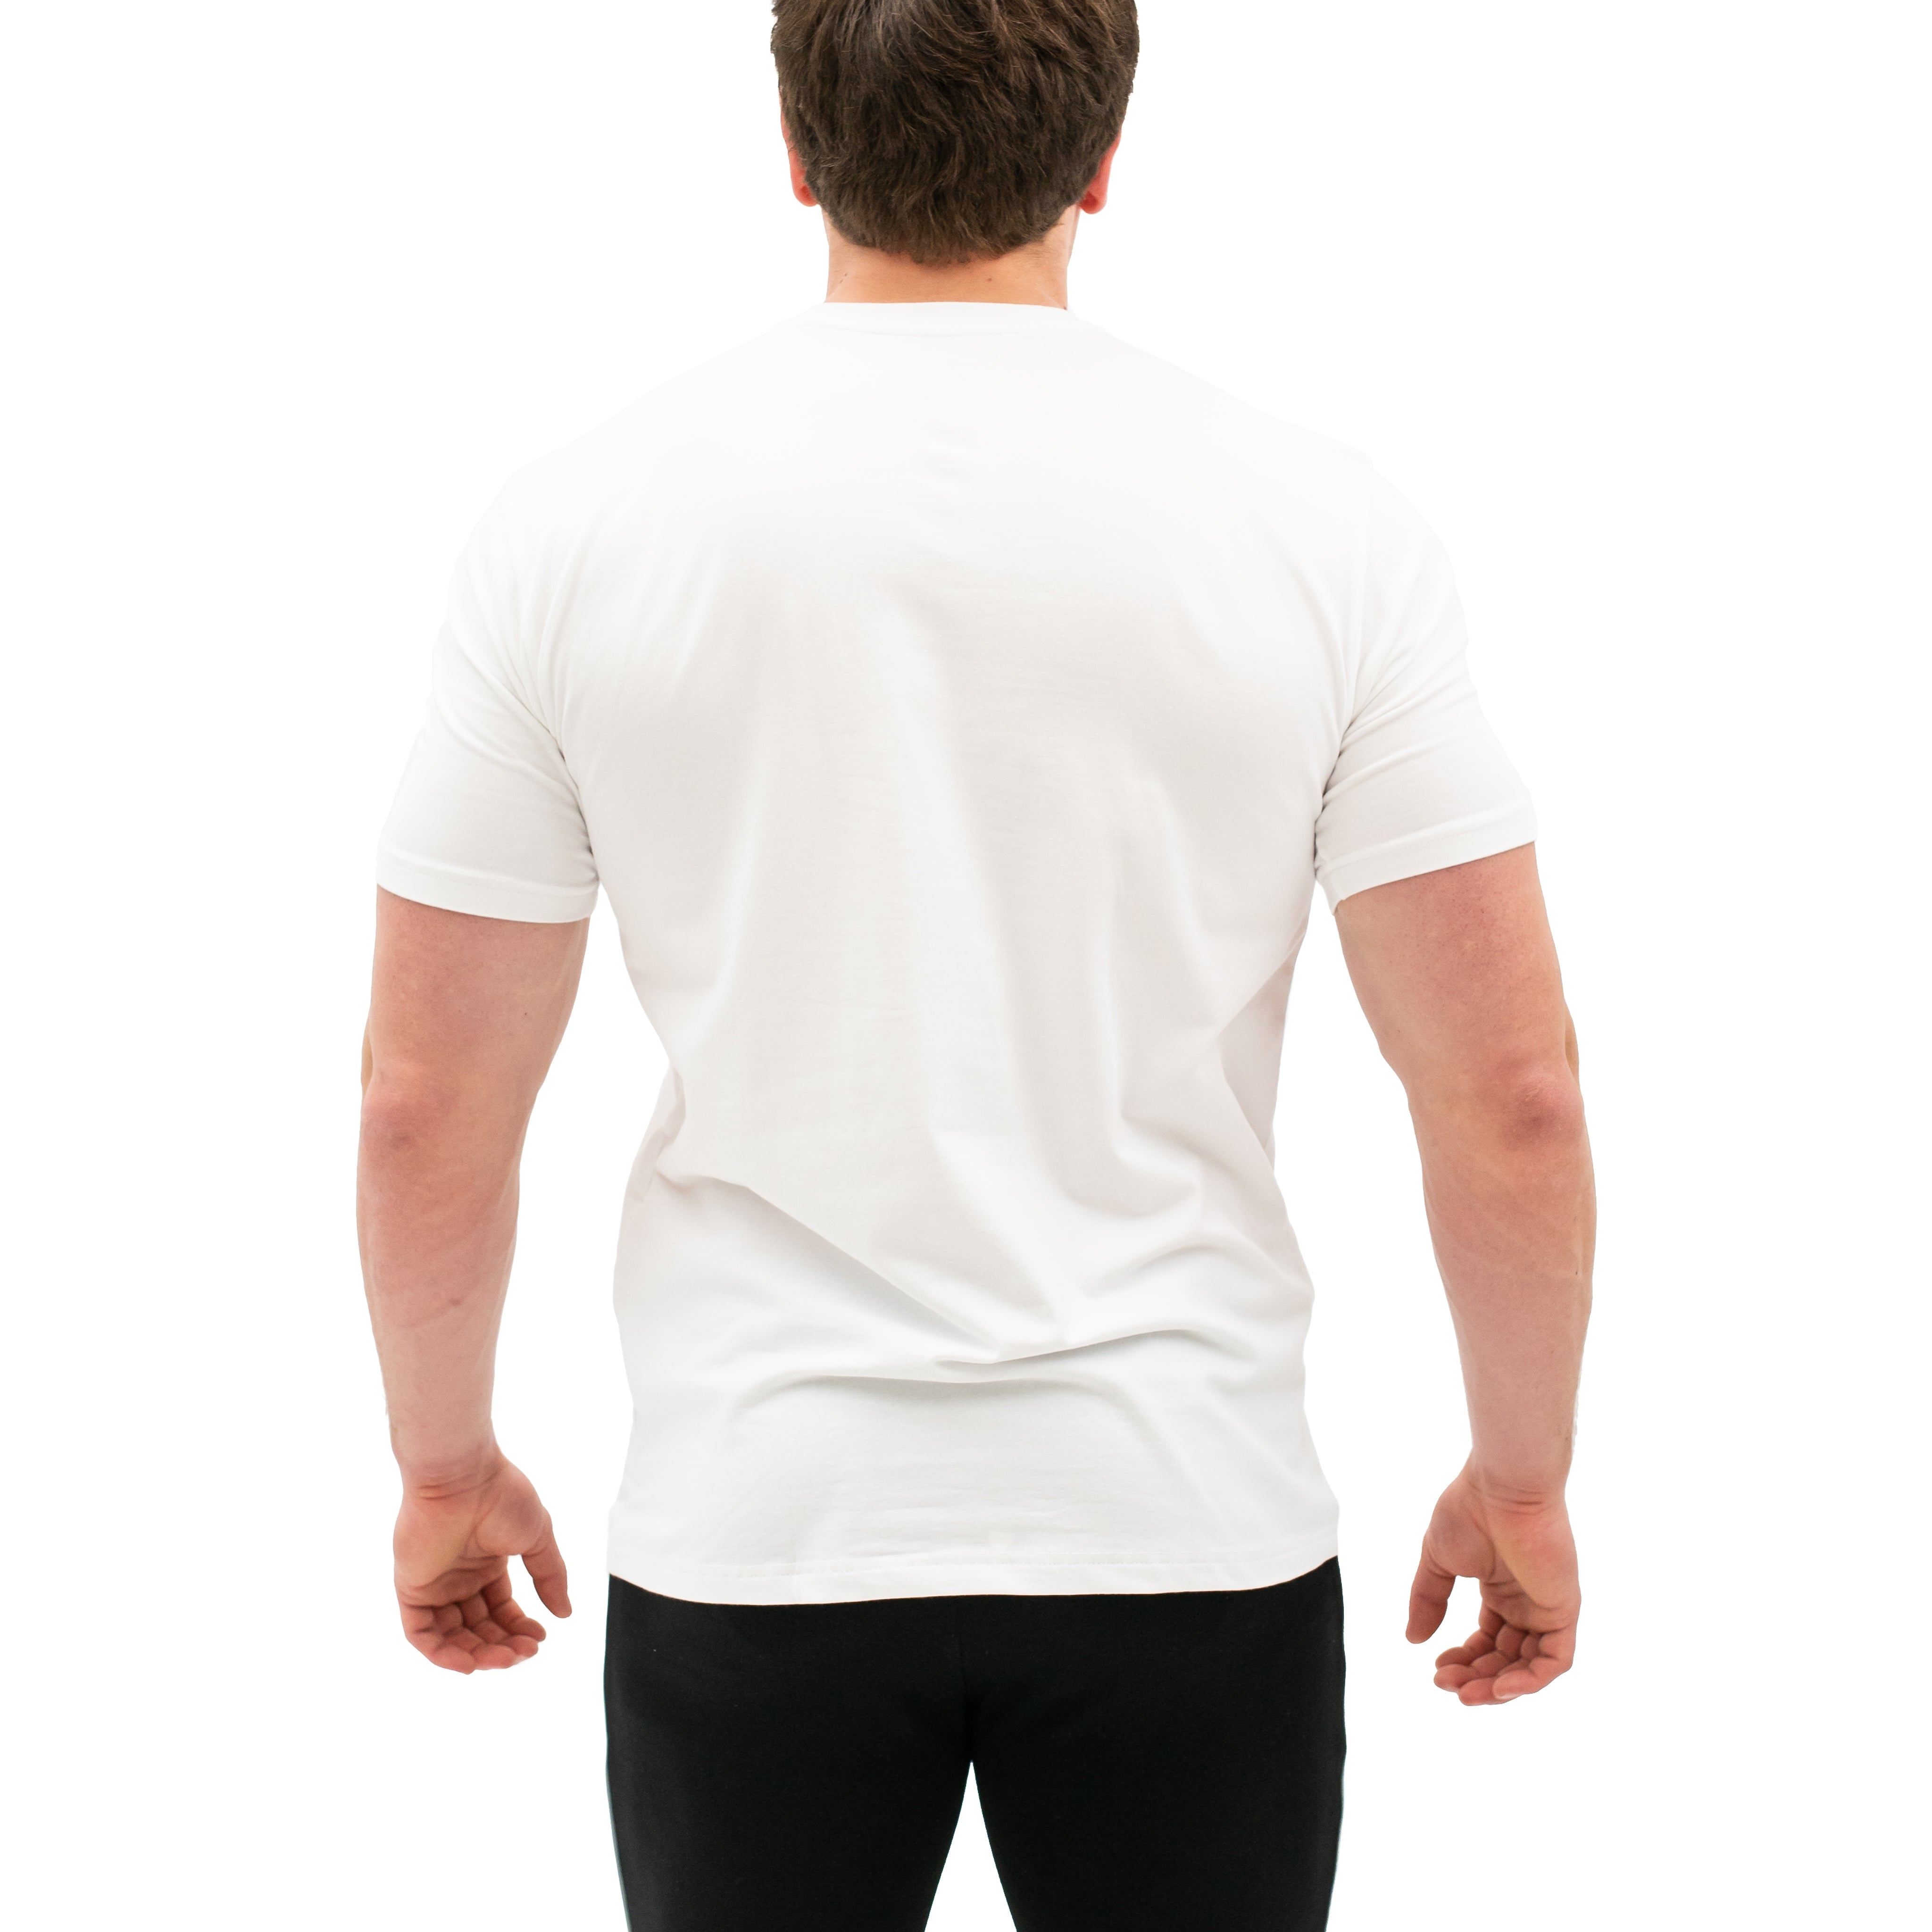 Standout from the crowd in our White Iced Demand Greatness Meet Shirt and let your energy show on the platform, in your training or while out and about. Our Meet tees offer a level of comfort like no other through their unique blend of materials and stretch in the places you desire for a comfortable fit that keeps your mind on your performance. A great addition to your IPF Approved Kit. 